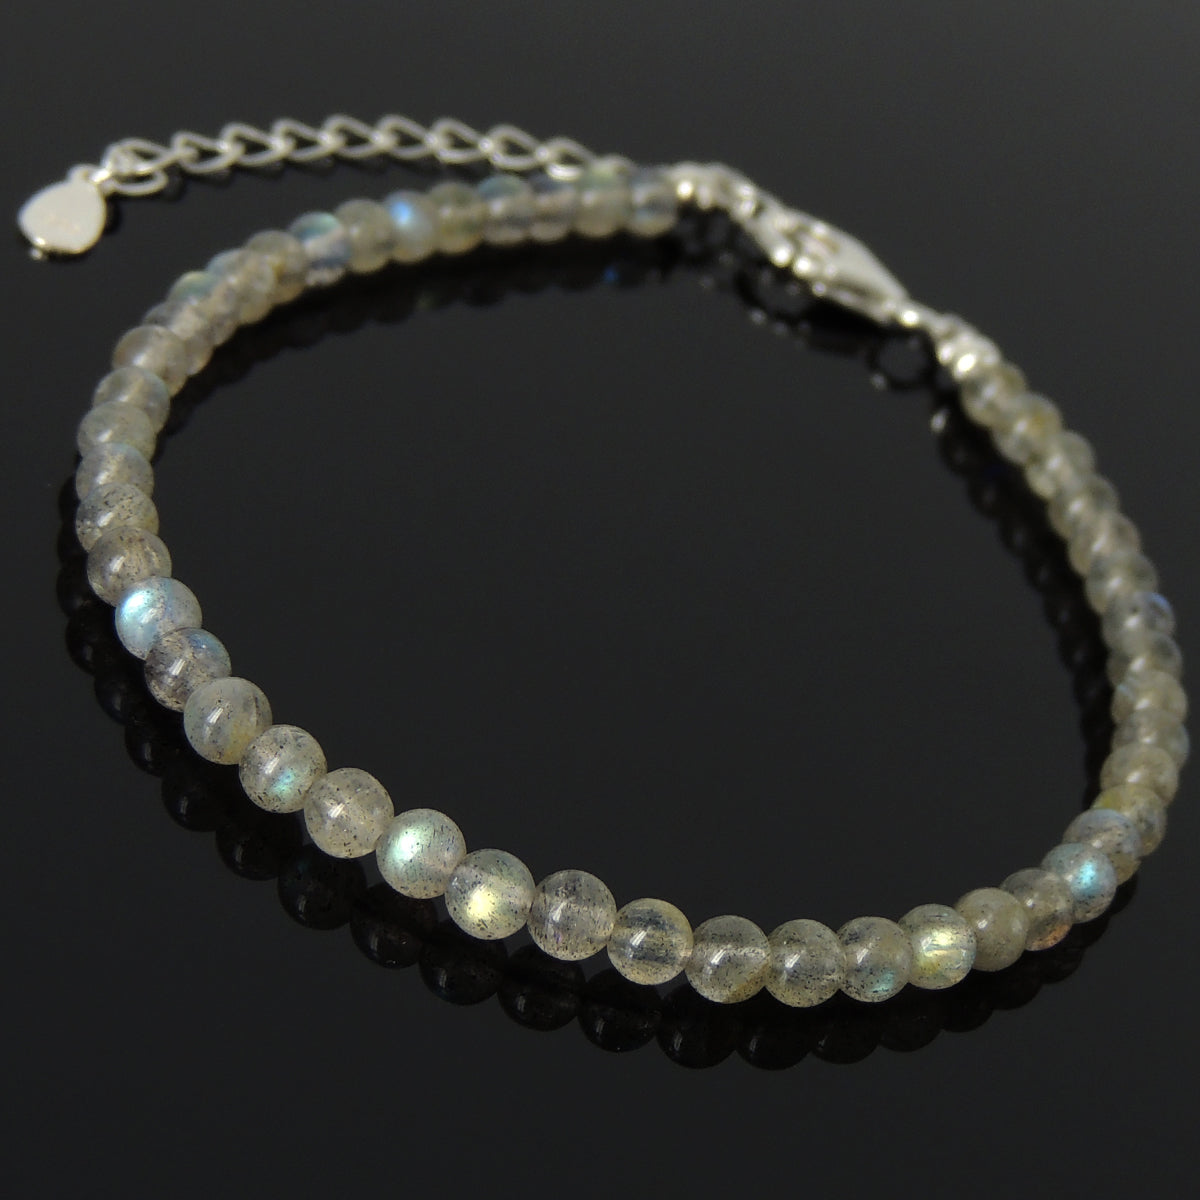 4mm Labradorite Healing Gemstone Bracelet with S925 Sterling Silver Beads, Chain, & Clasp - Handmade by Gem & Silver BR1320